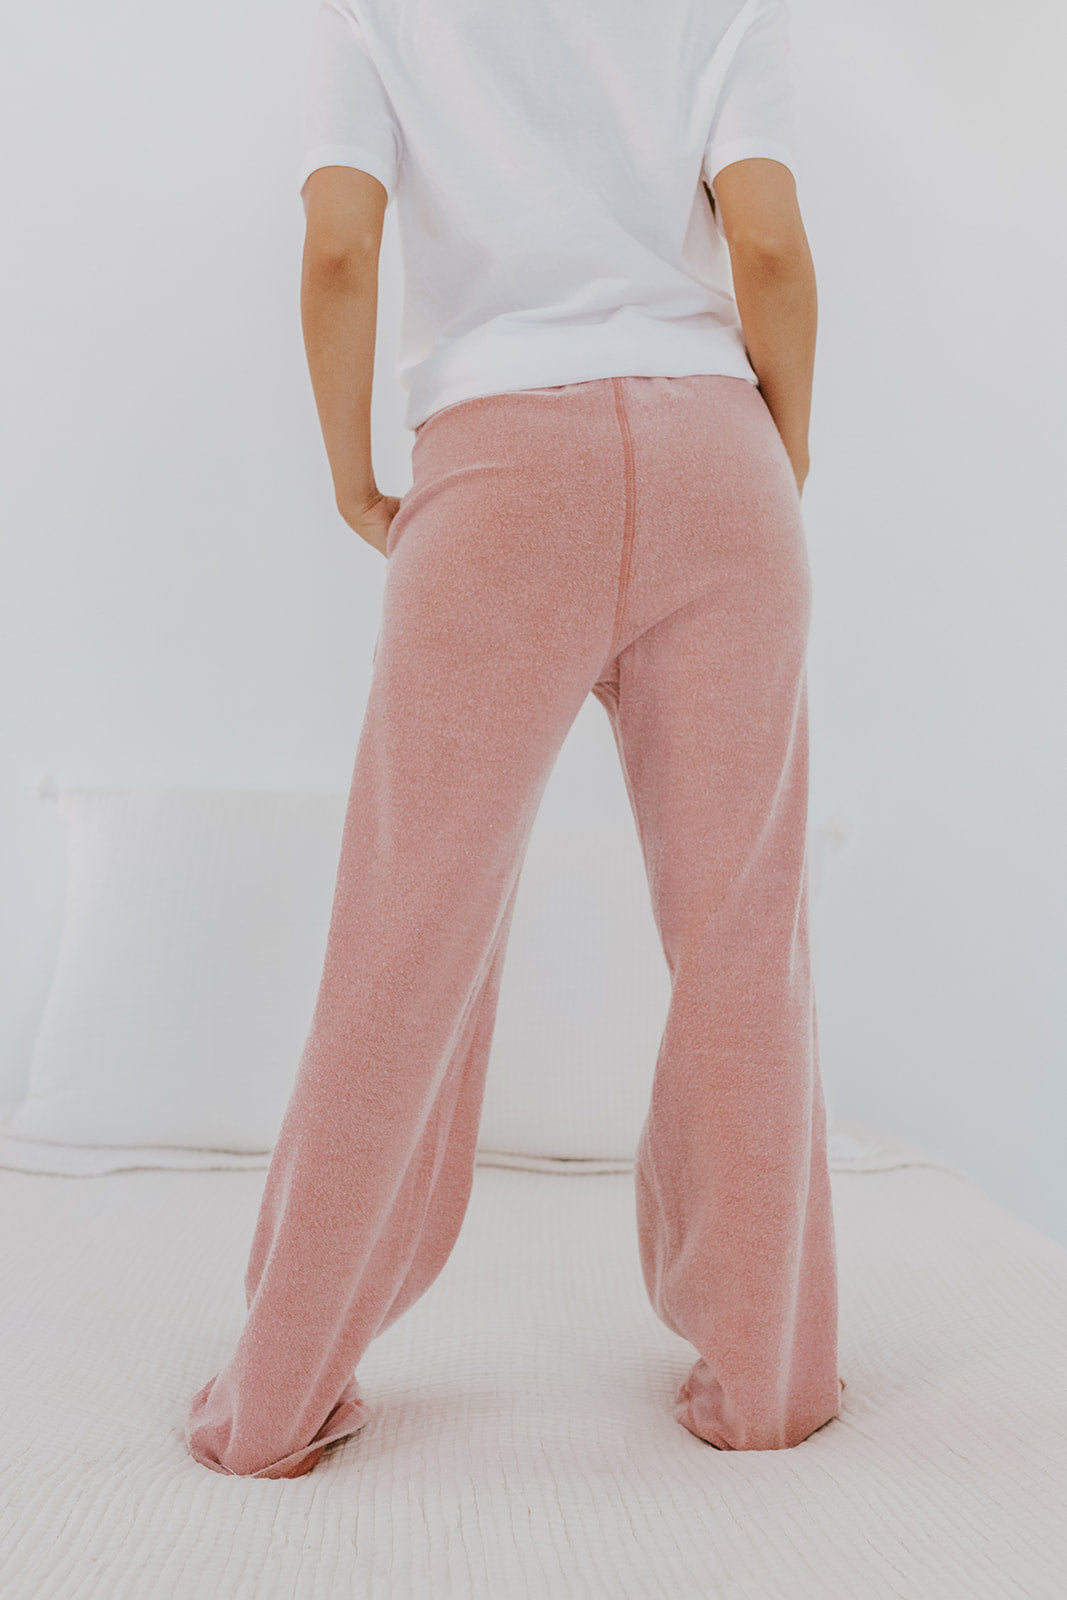 THE DAYDREAM LOUNGE PANTS IN DUSTY PINK